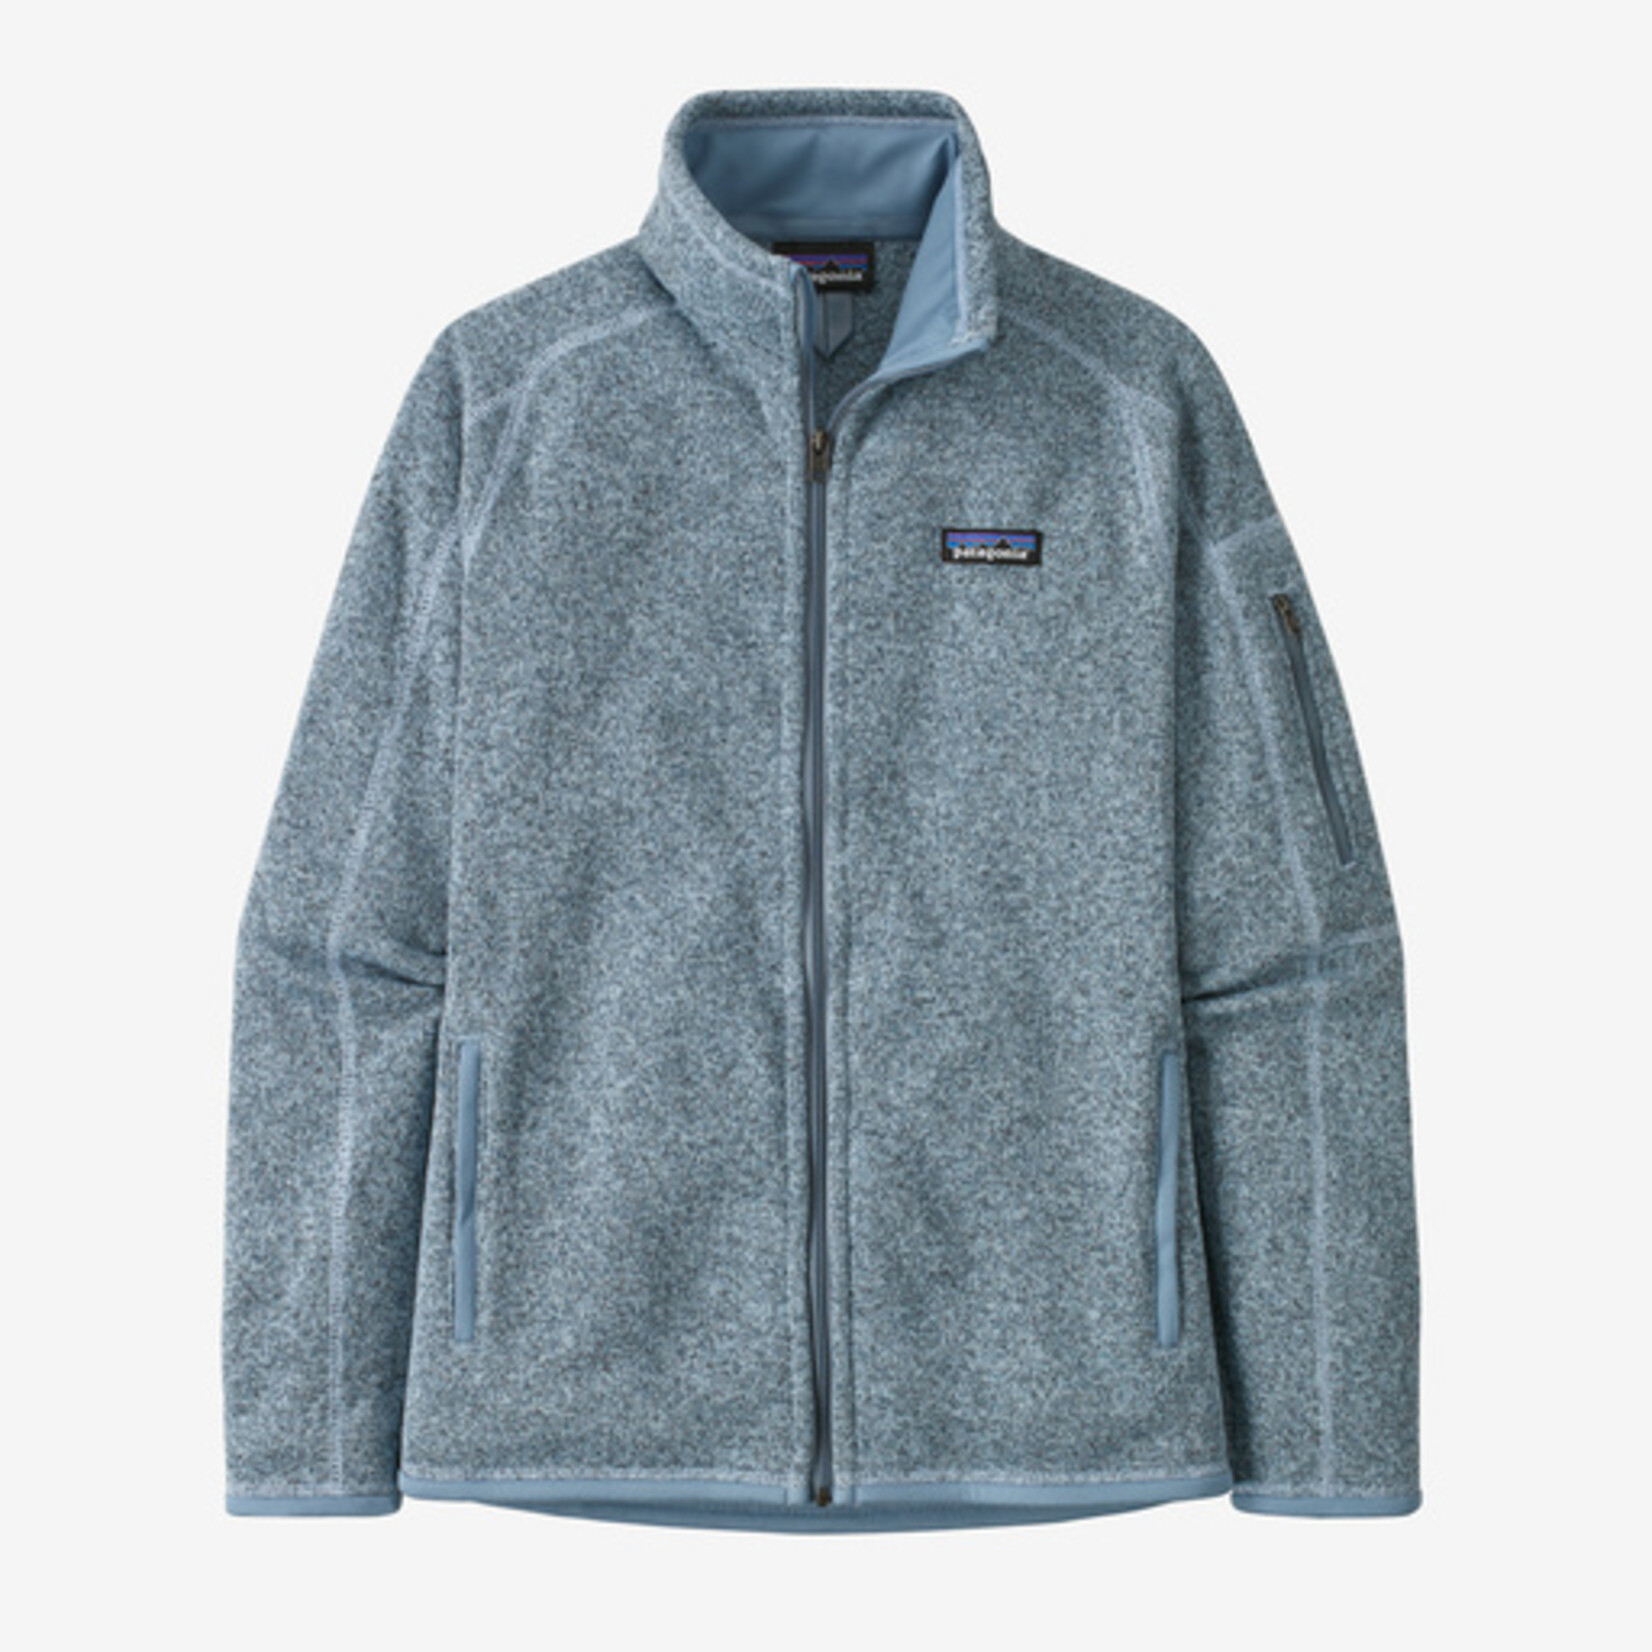 Patagonia W’s Better sweater jacket